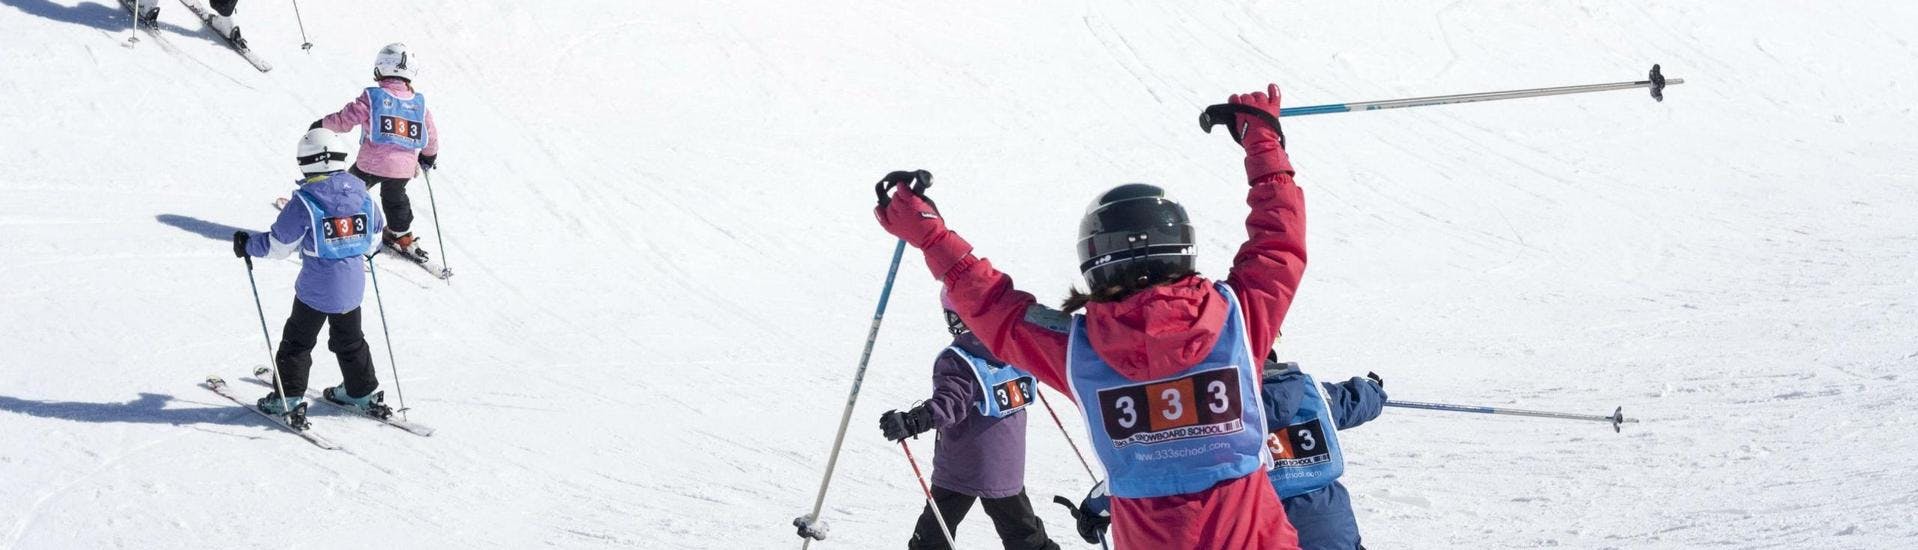 A group of friends is benefiting from the tailored-made program of the Private Ski Lessons for Kids - Val d'Isère prepared by 333 Ski School.